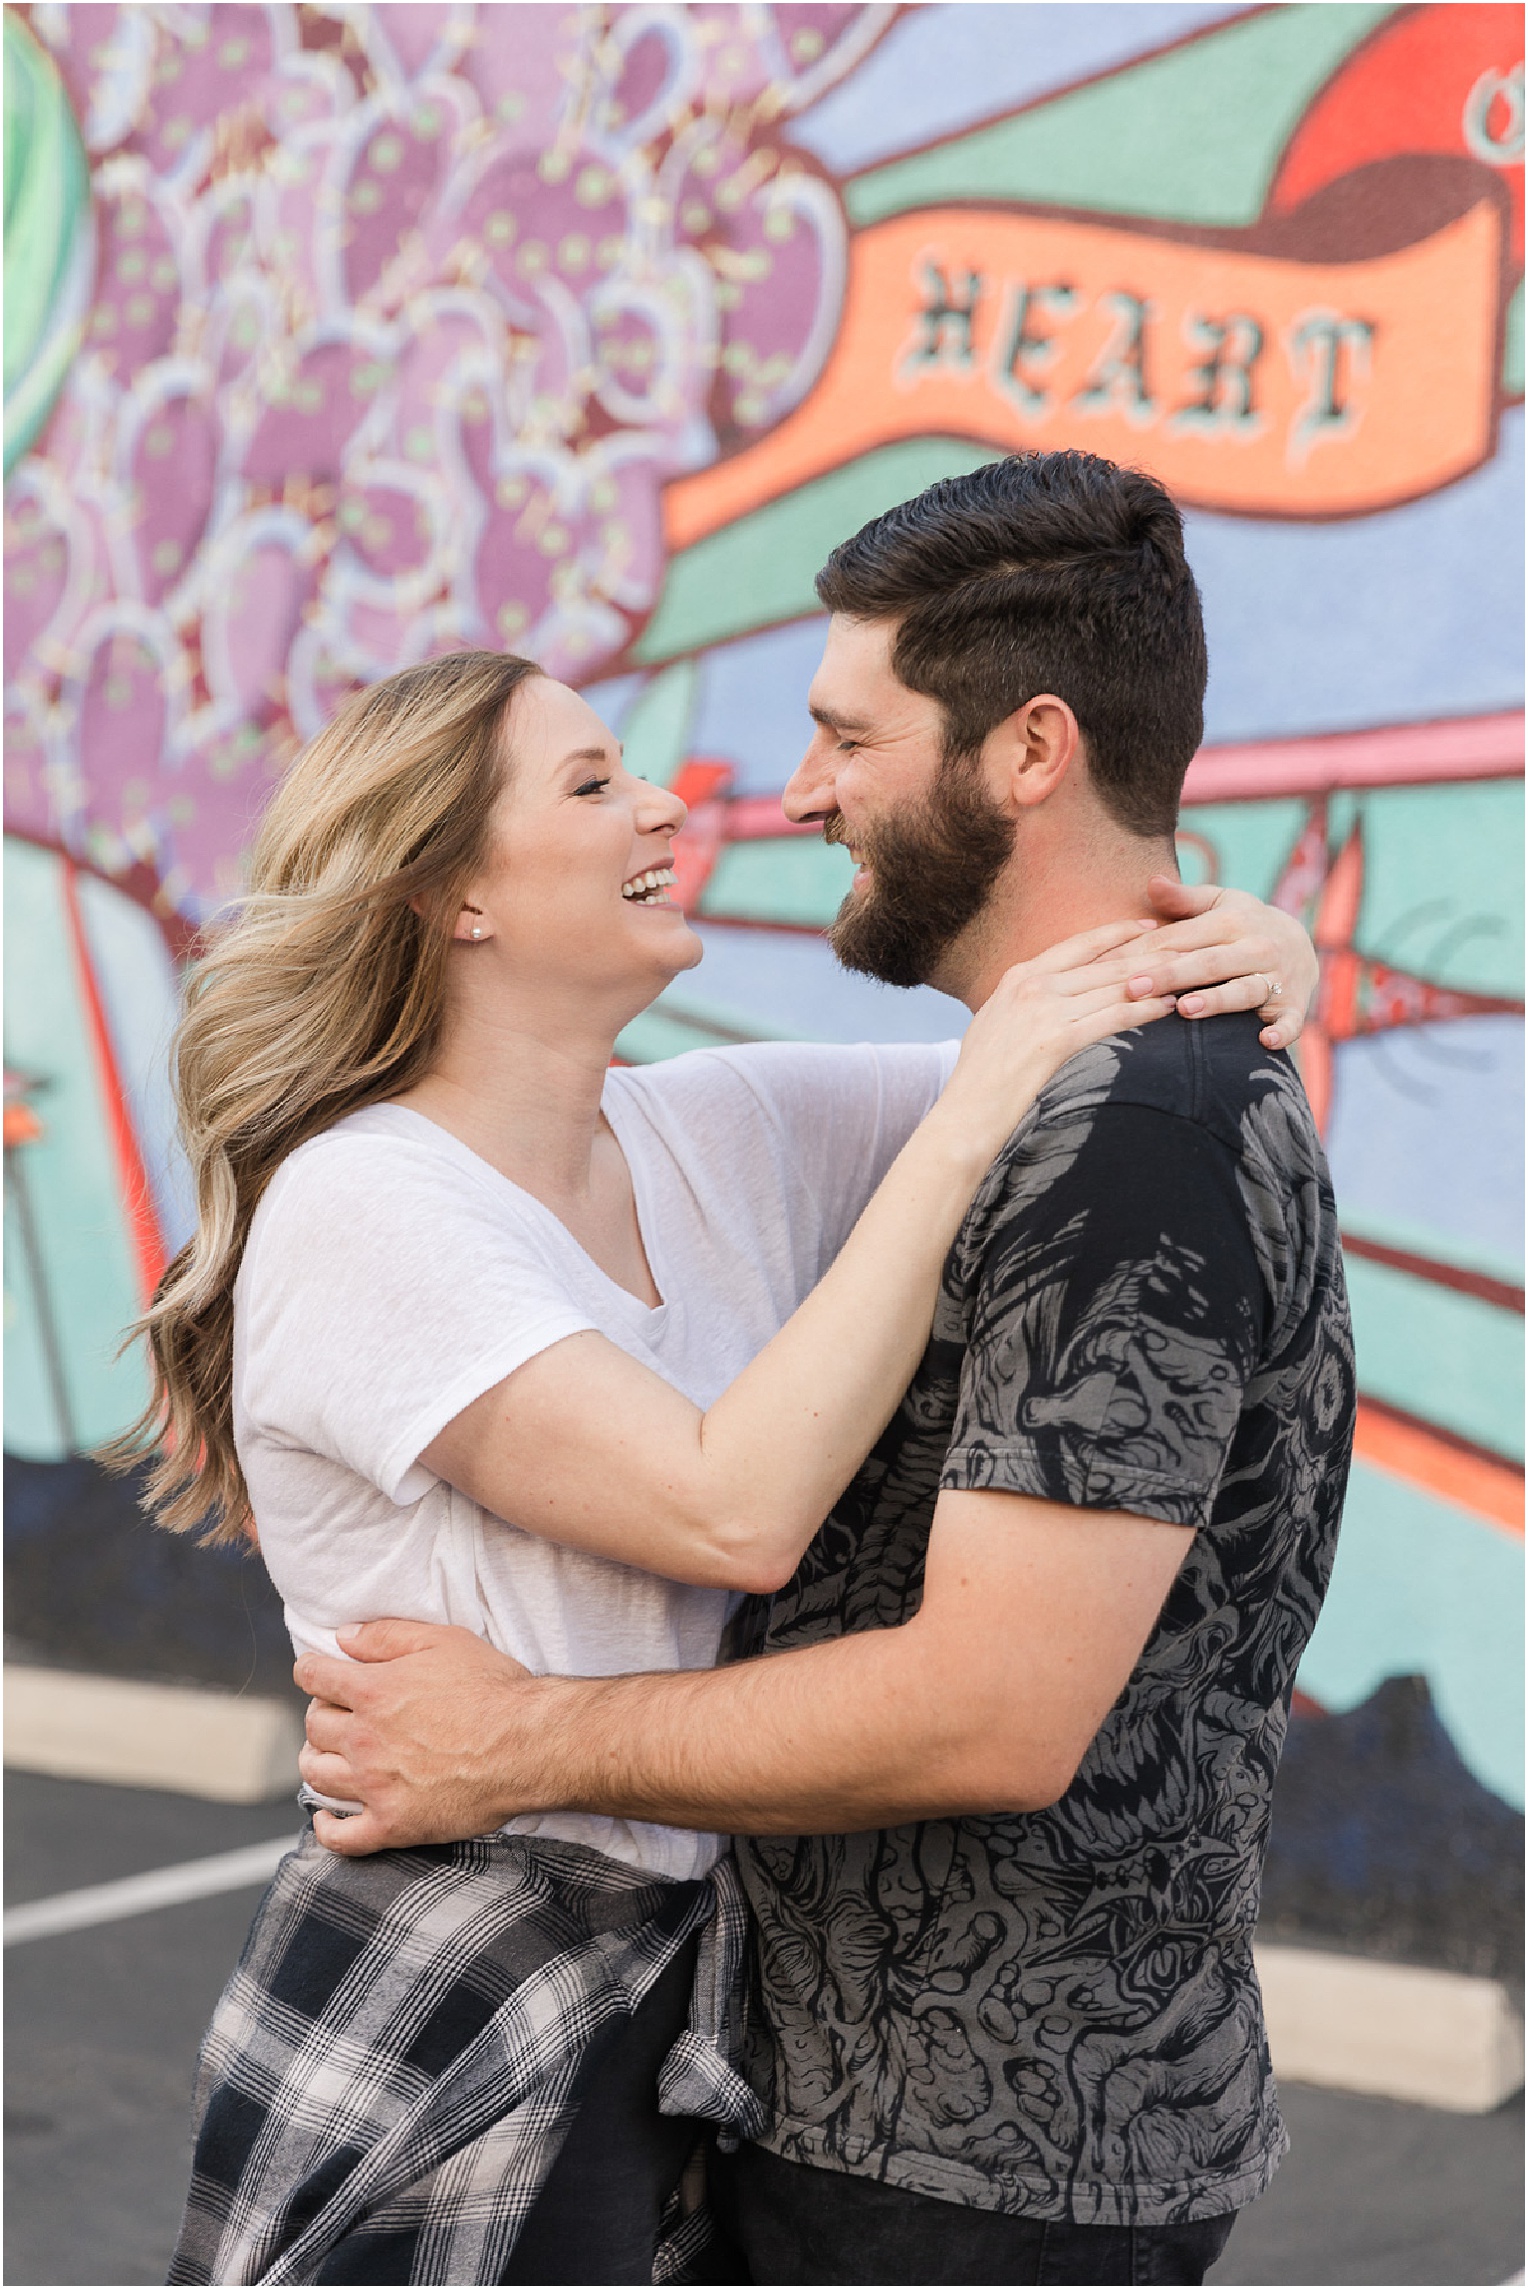 Engagement Photos in Tucson, Tucson AZ Katie + Michael casual downtown engagement session with city mural